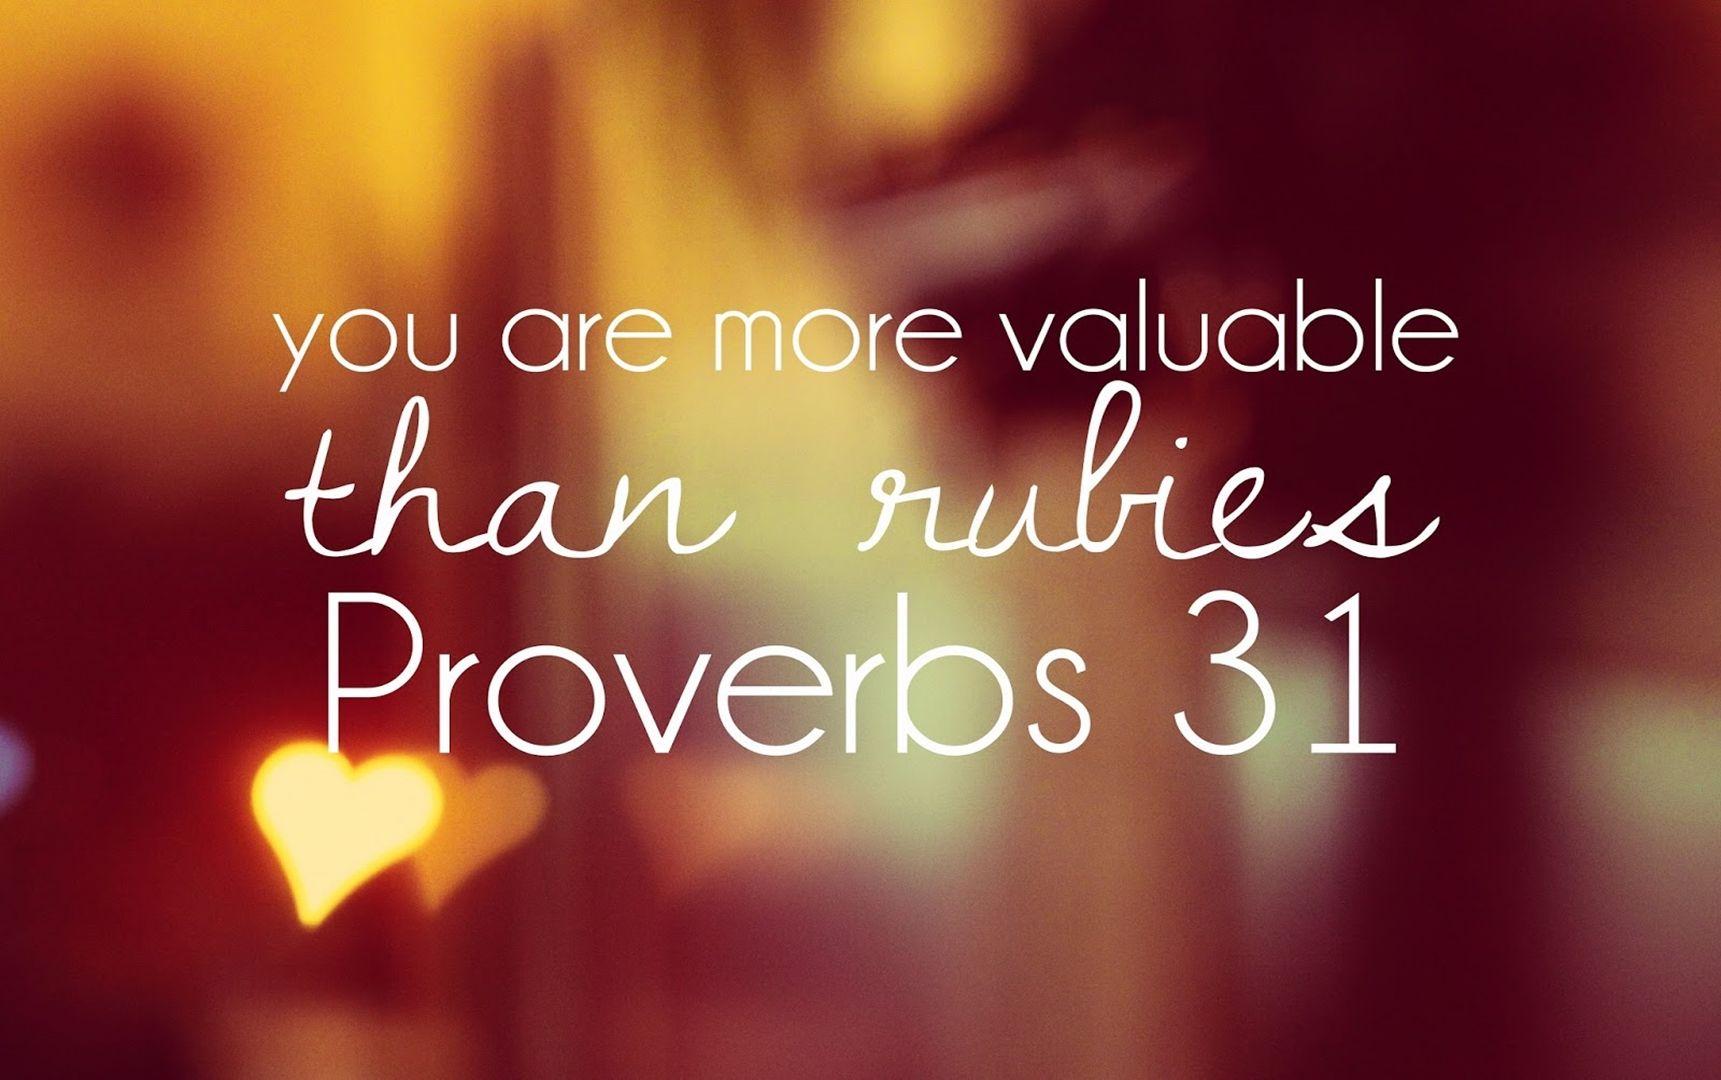 Bible verses about Kindness 5:8 HD Wallpaper Free Download